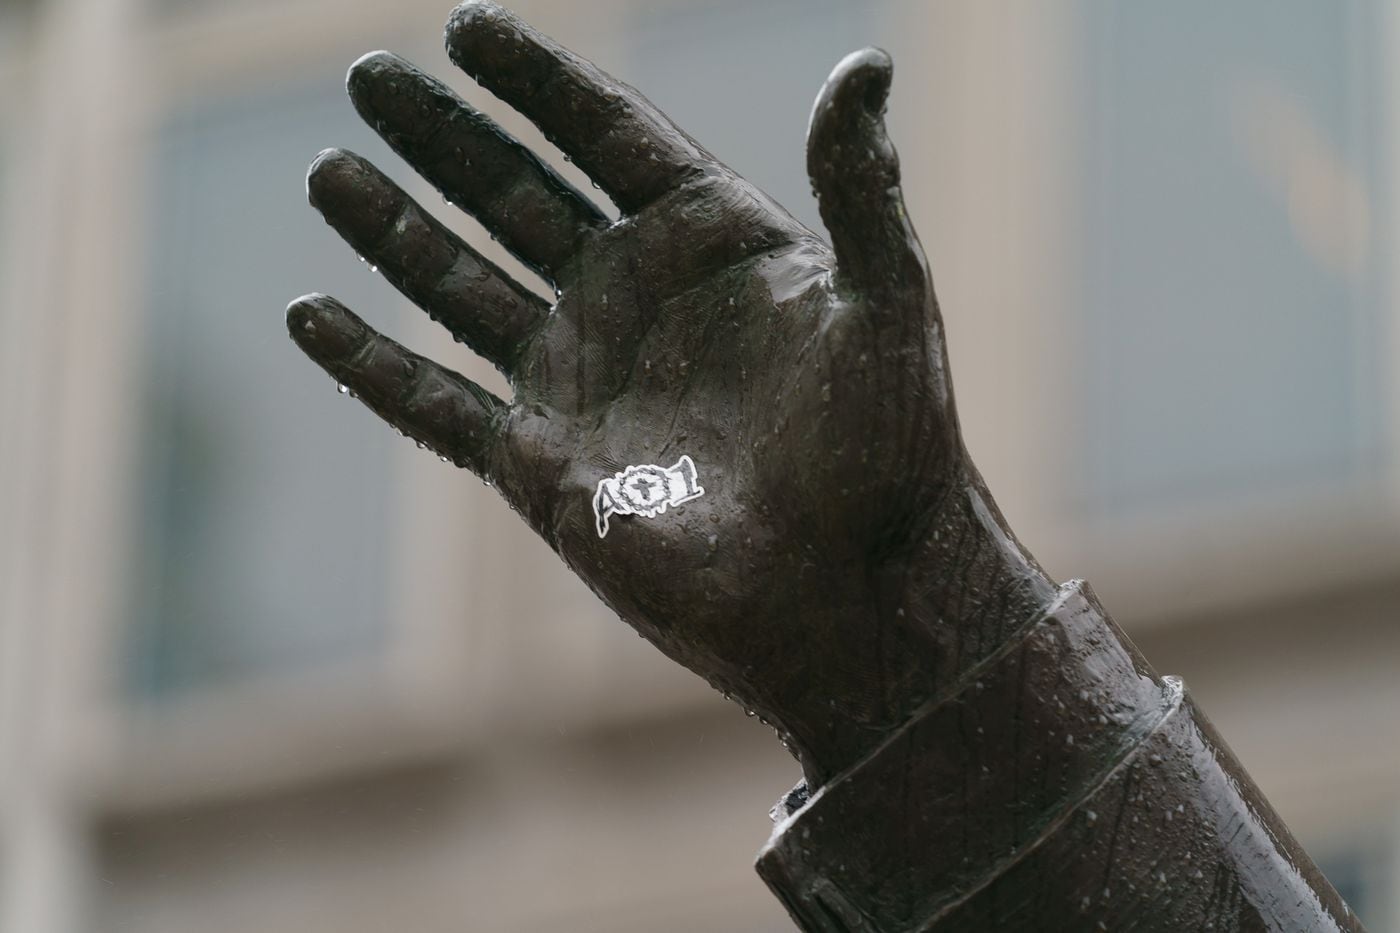 A sticker with the logo of Carson Wentz's AO1 Foundation was placed on the hand of the Frank Rizzo statue in front of the Municipal Services Building in Philadelphia.